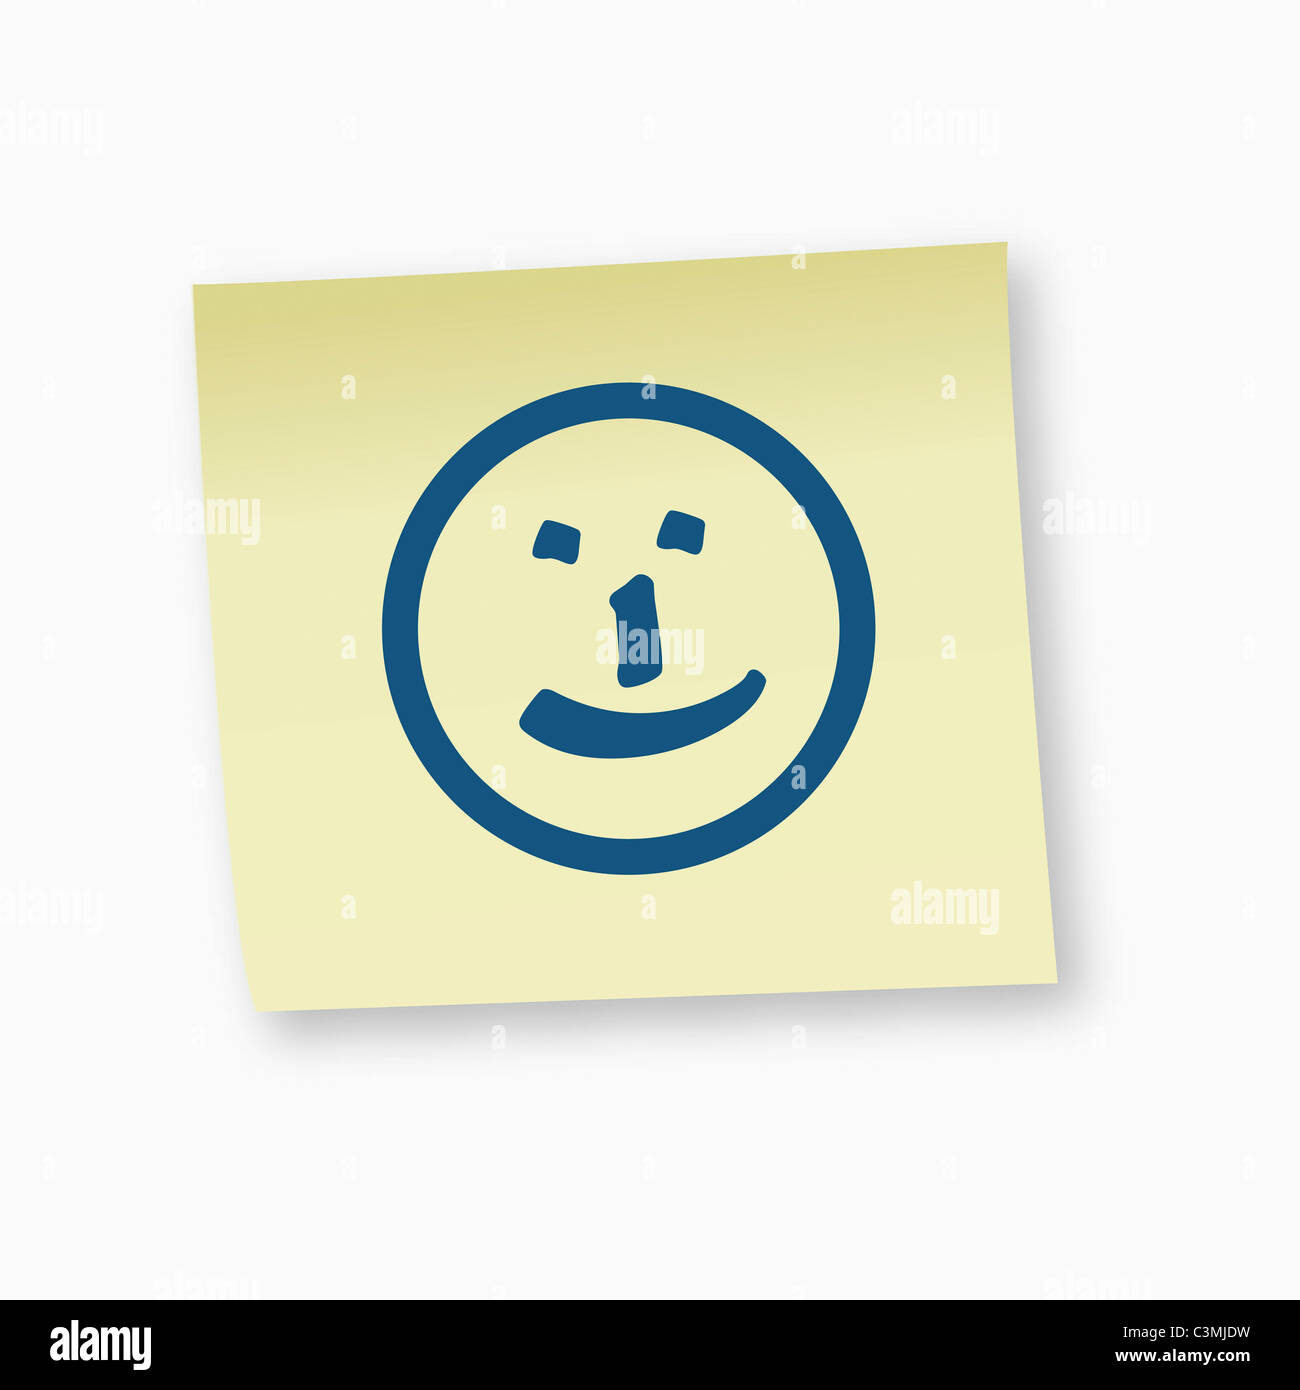 Smiley face sign on adhesive note, close-up Stock Photo